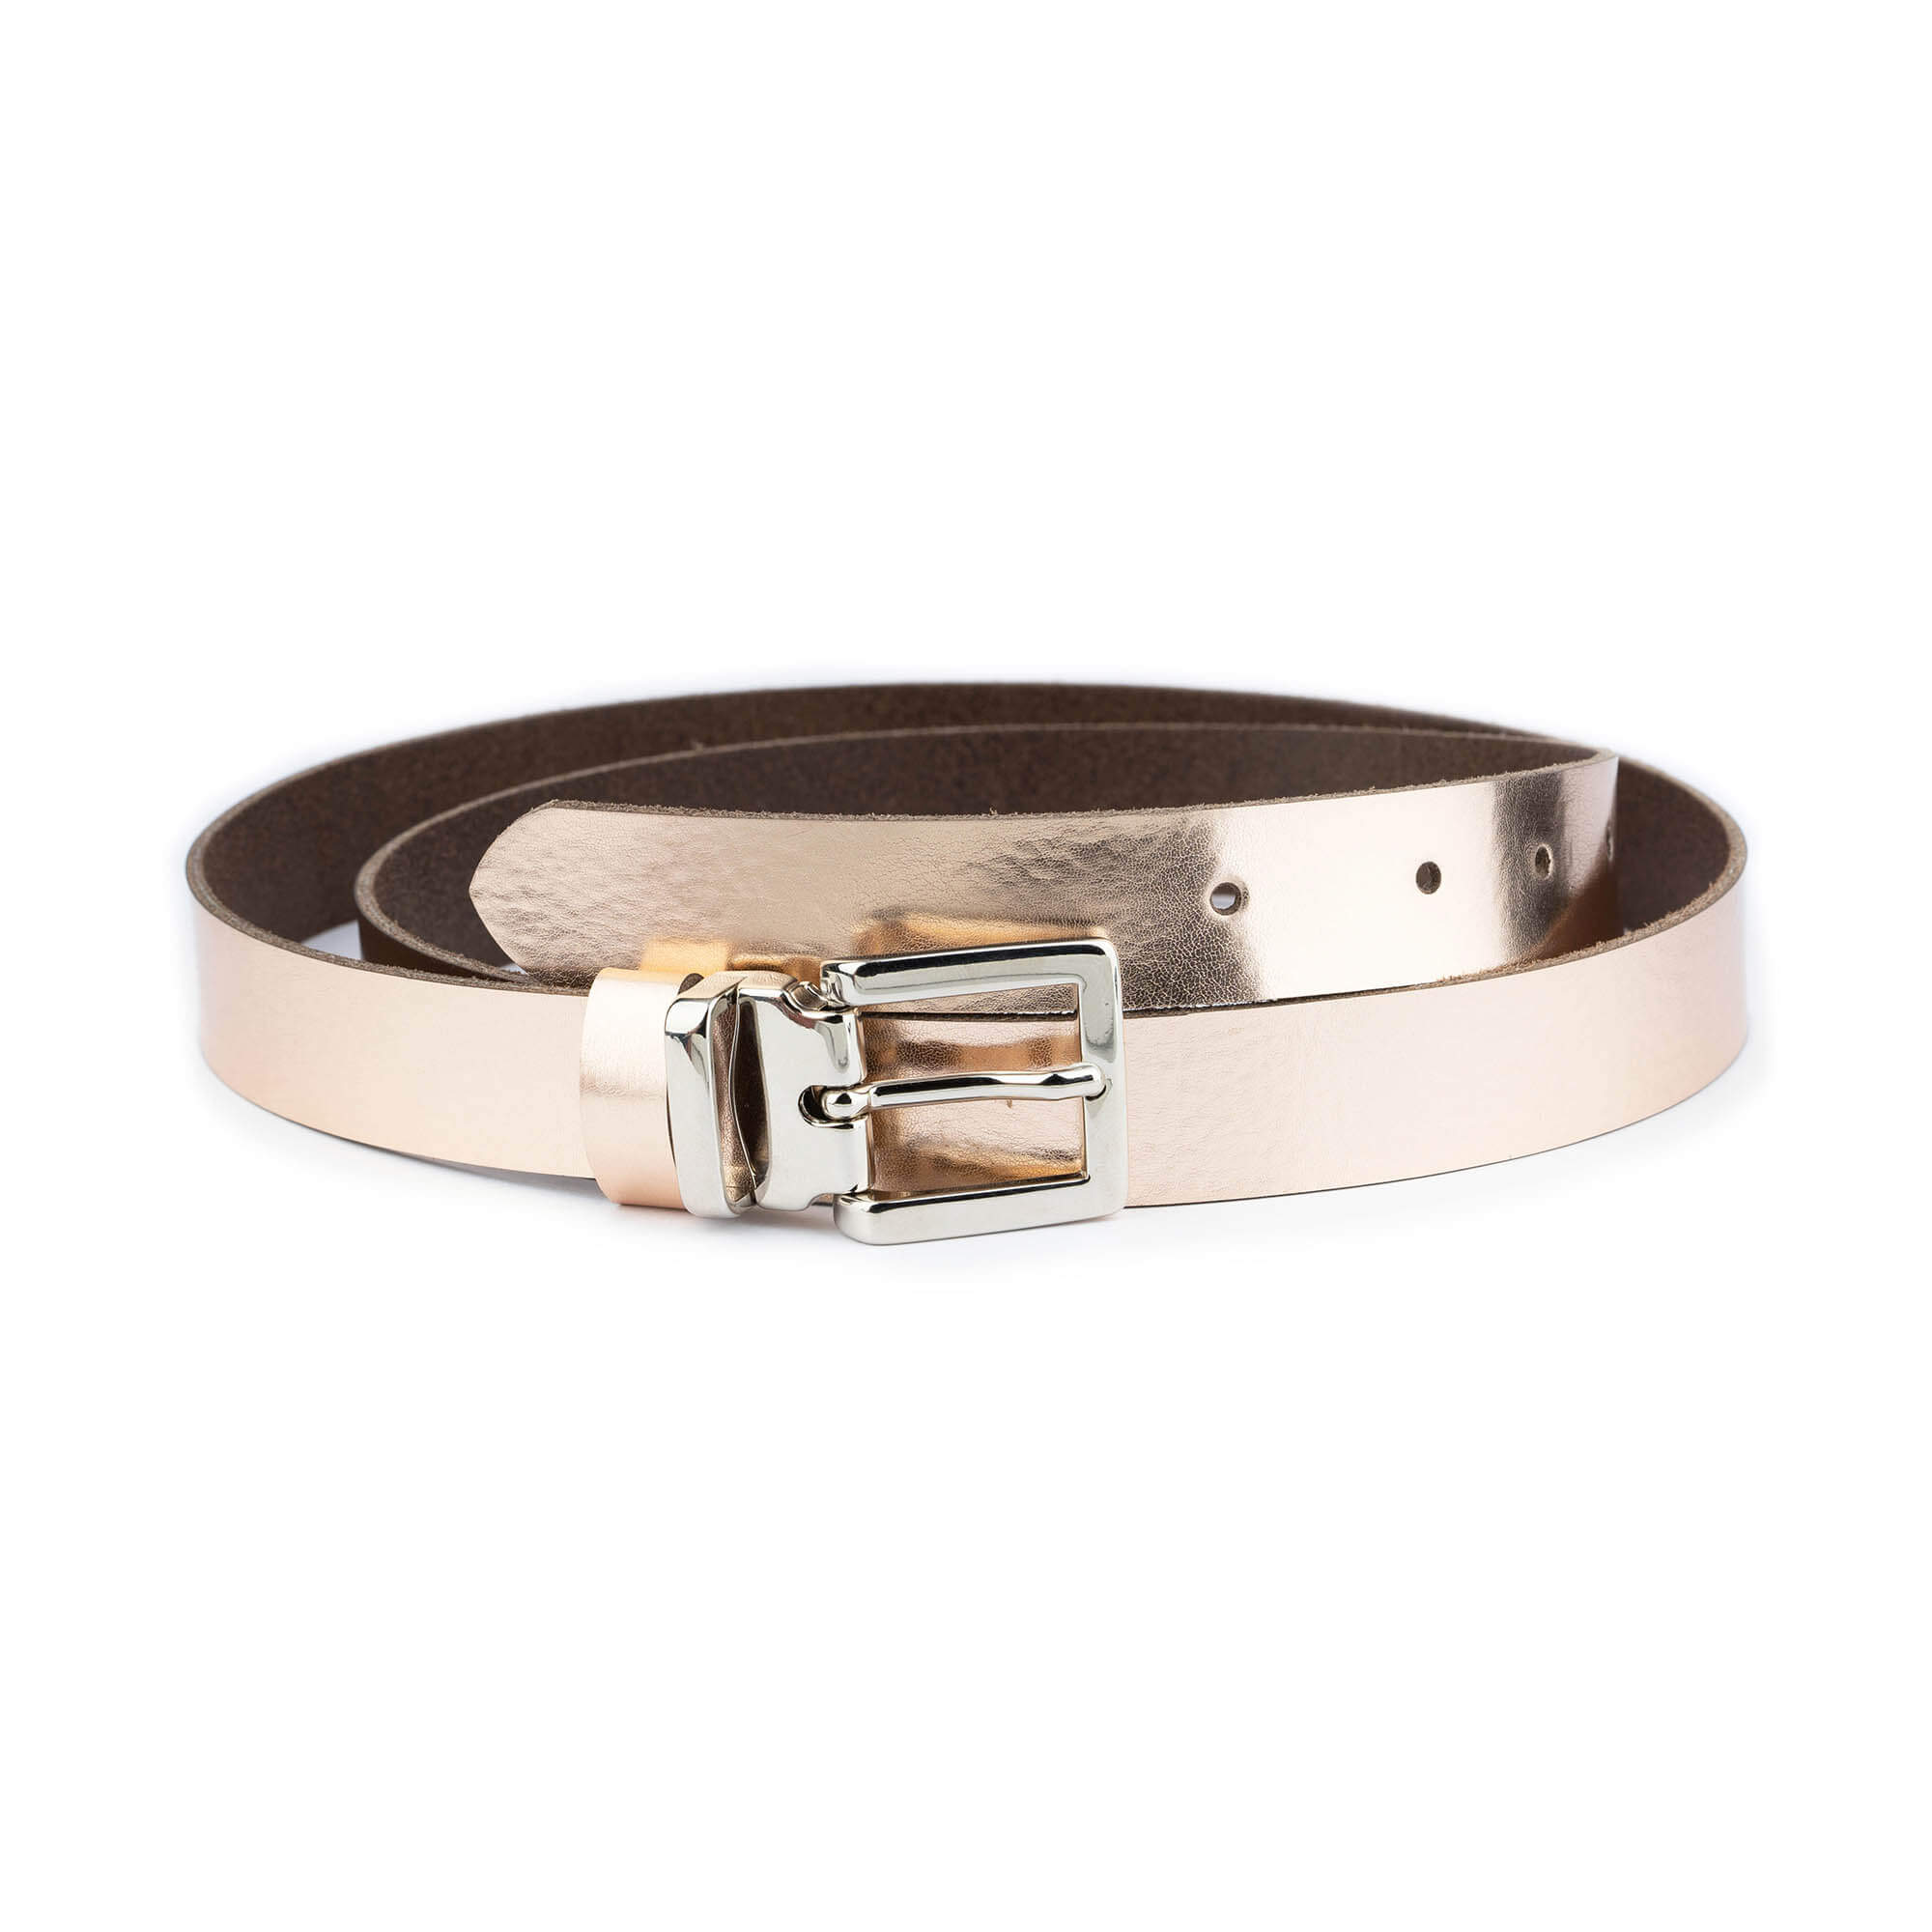 Buy Rose Gold Metallic Leather Belt With Silver Buckle ...